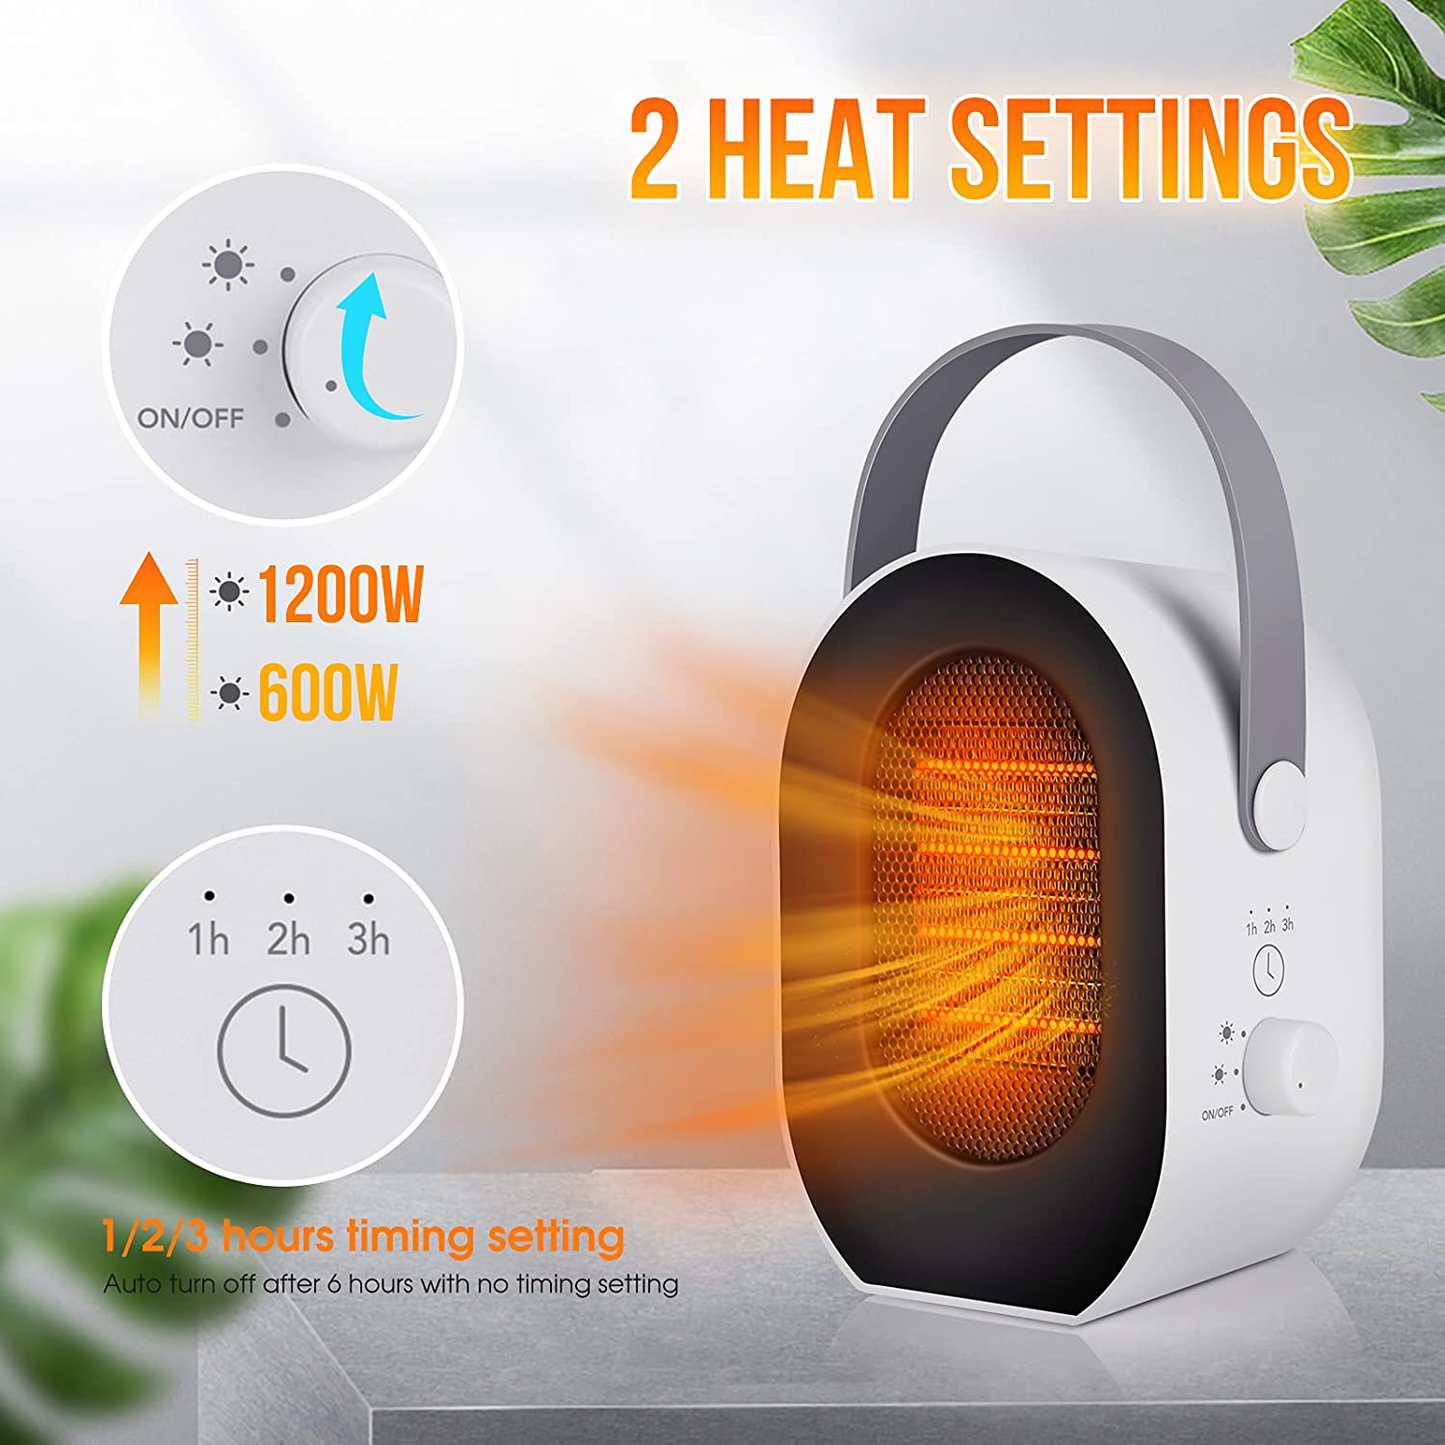 Portable Electric Space Heater with Thermostat, 1200W Safe and Quiet PTC Fast Heating Ceramic Small Heater Fan for Bedroom, Office and Indoor Use